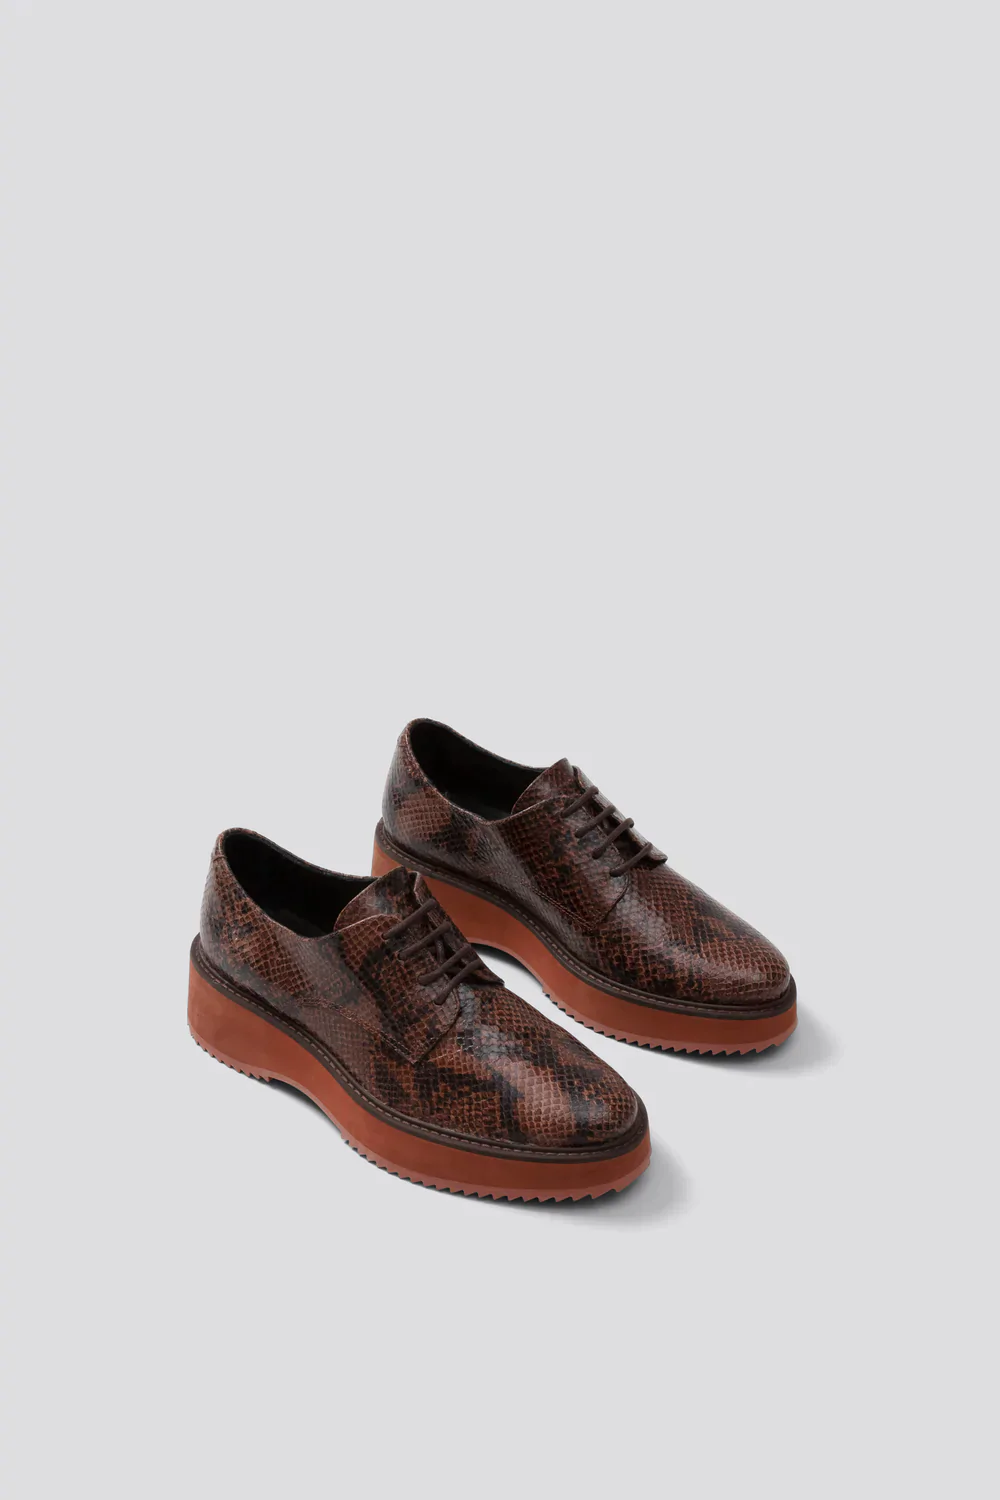 Product Image for Curb Oxford, Brown Multi